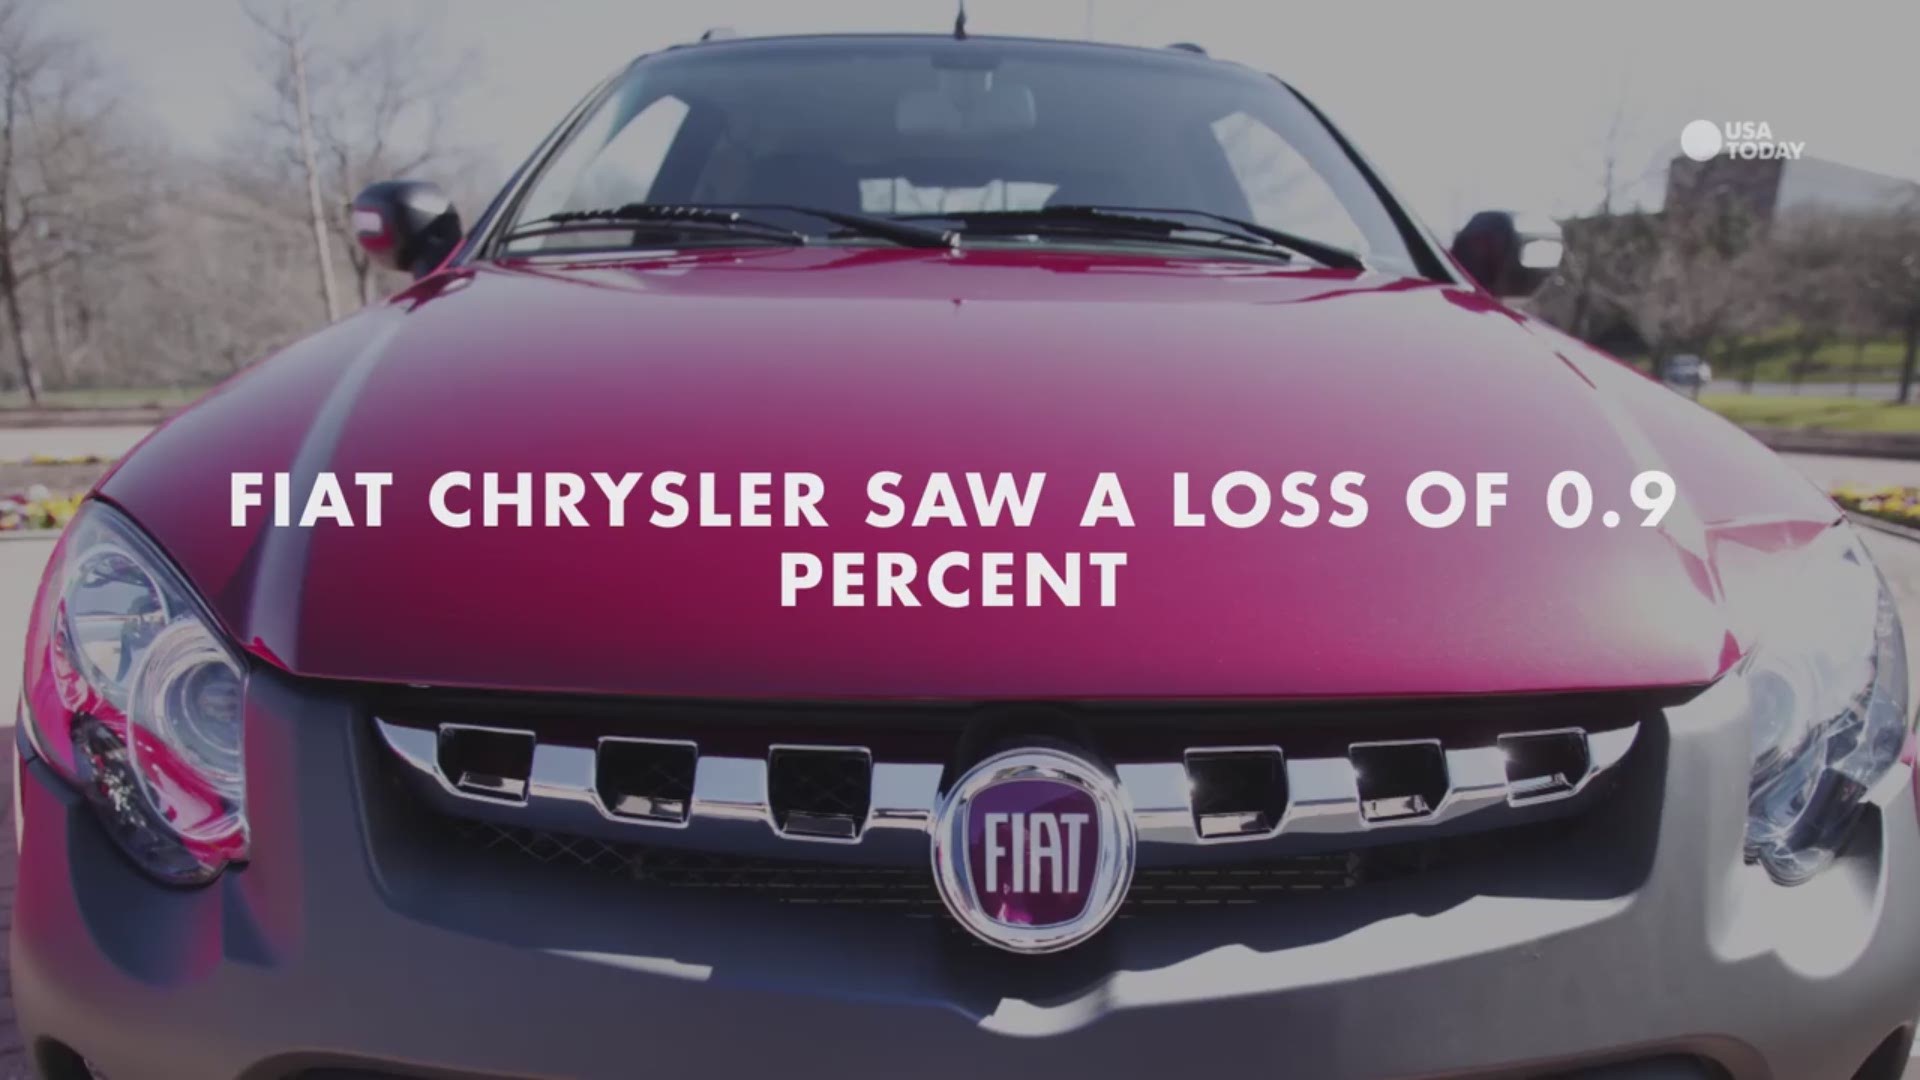 Ford, GM and Fiat Chrysler all posted sales declines in September. Overall, analysts were expecting higher losses for the companies.